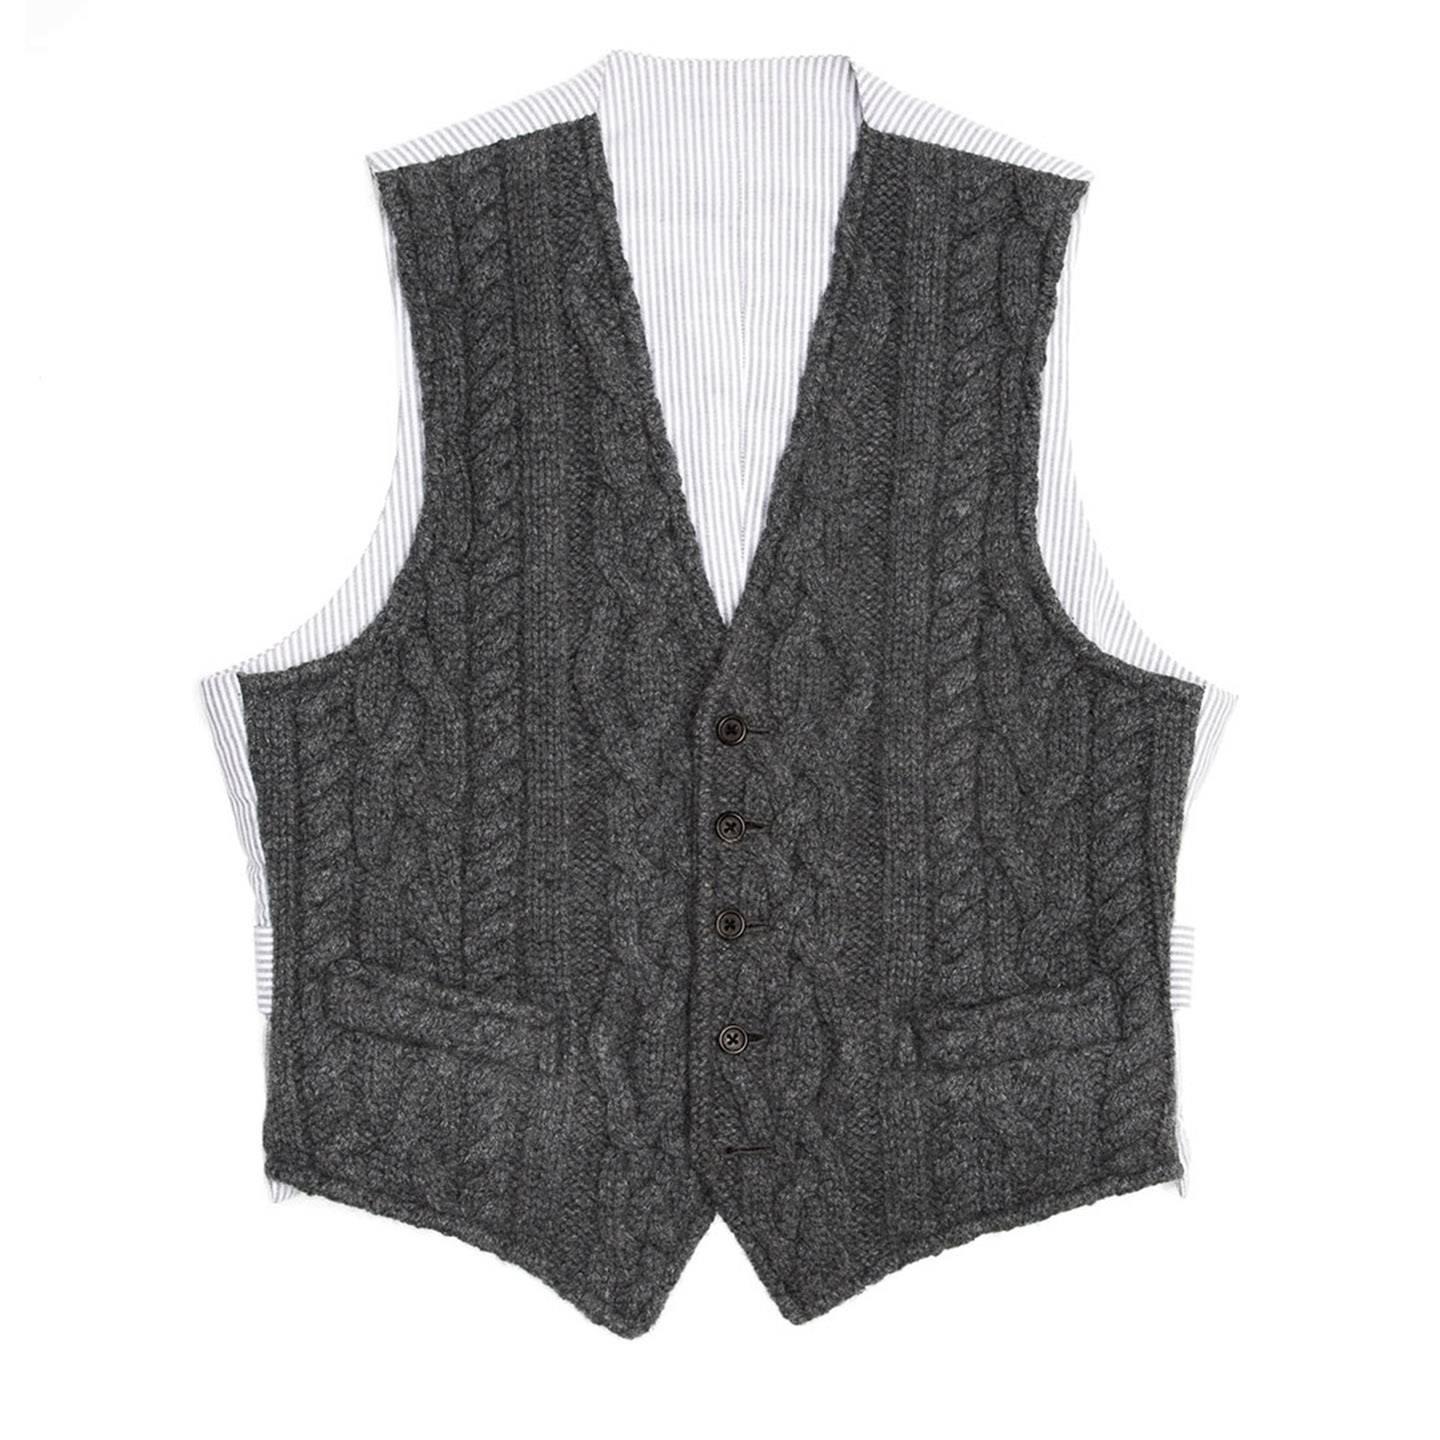 Fall 2009 dark grey cable knit cashmere vest with grey & white striped cotton back panel and adjustable buttoned back detail. Made for Men Worn by Women too. Made in U.S.A.

Size  1

Condition  Excellent: worn a few times